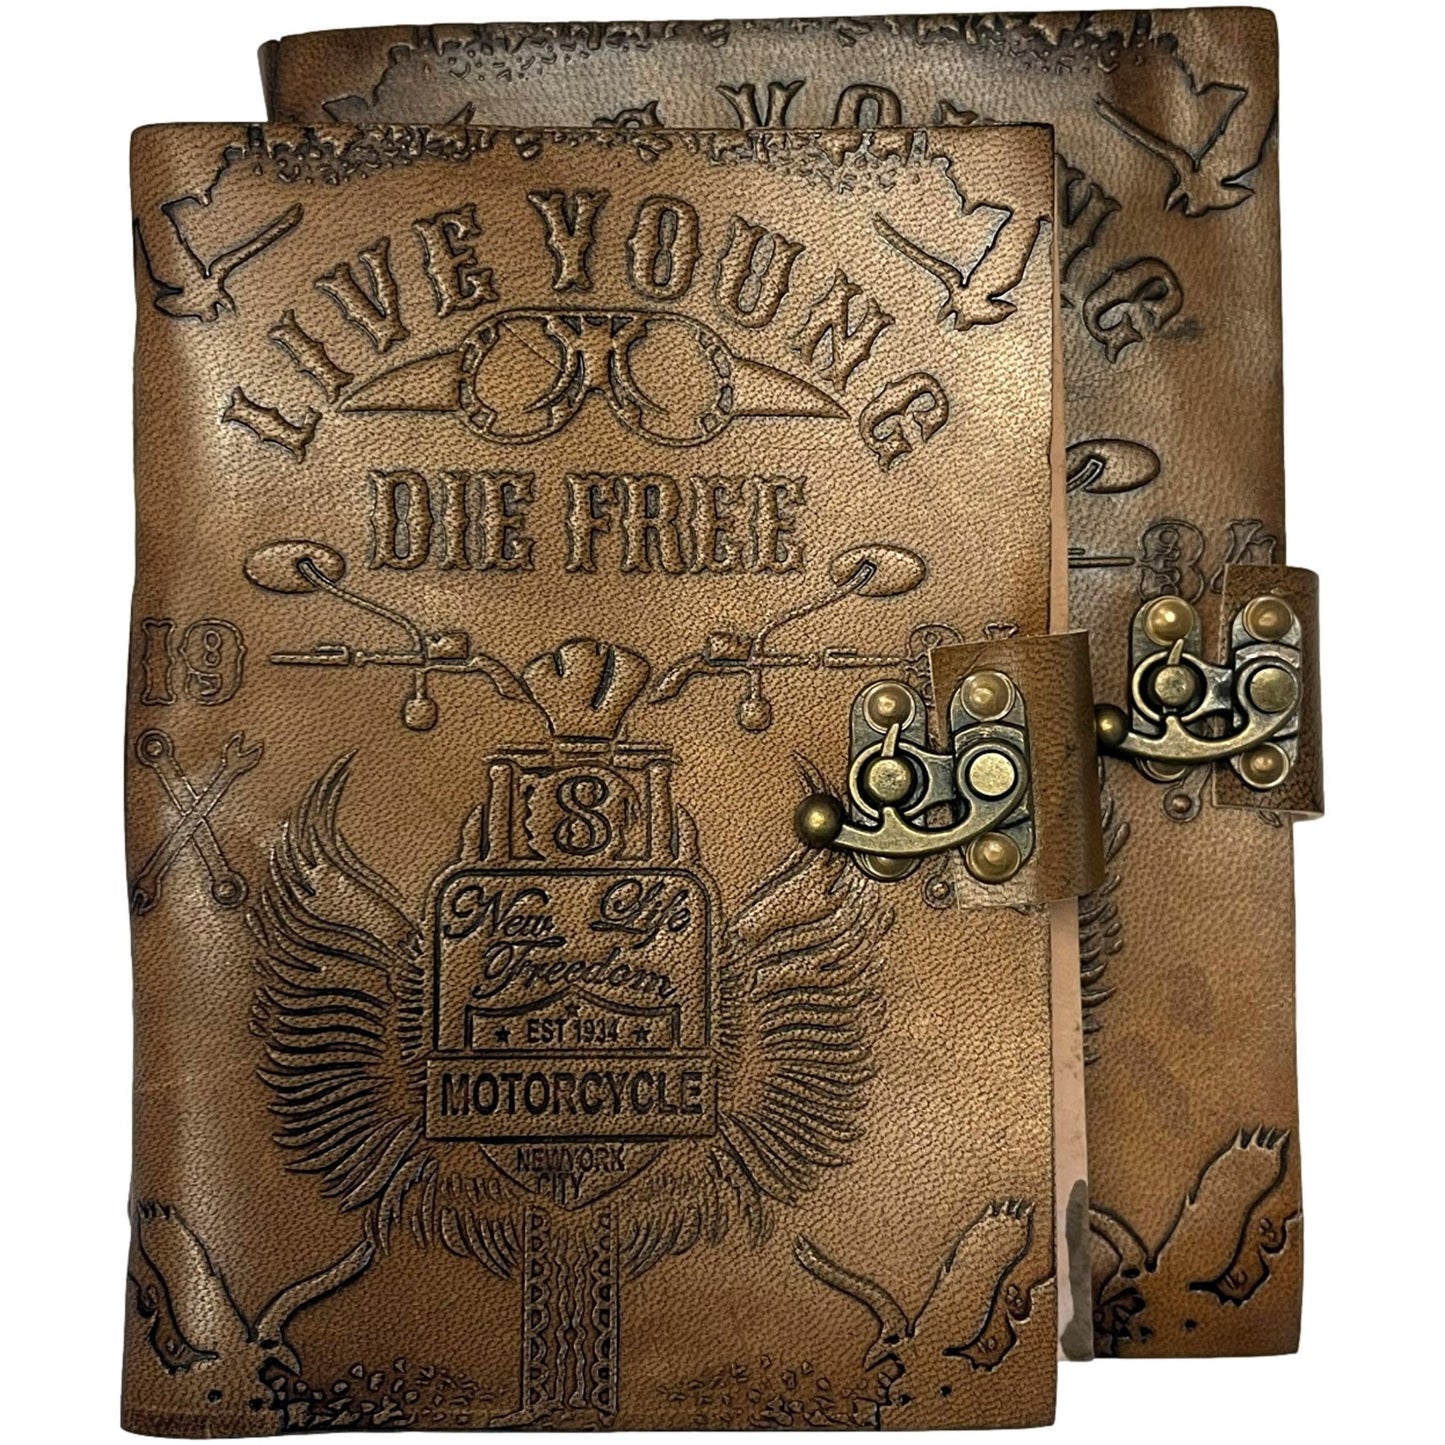 100% Leather Motorcycle Journal with Clasp